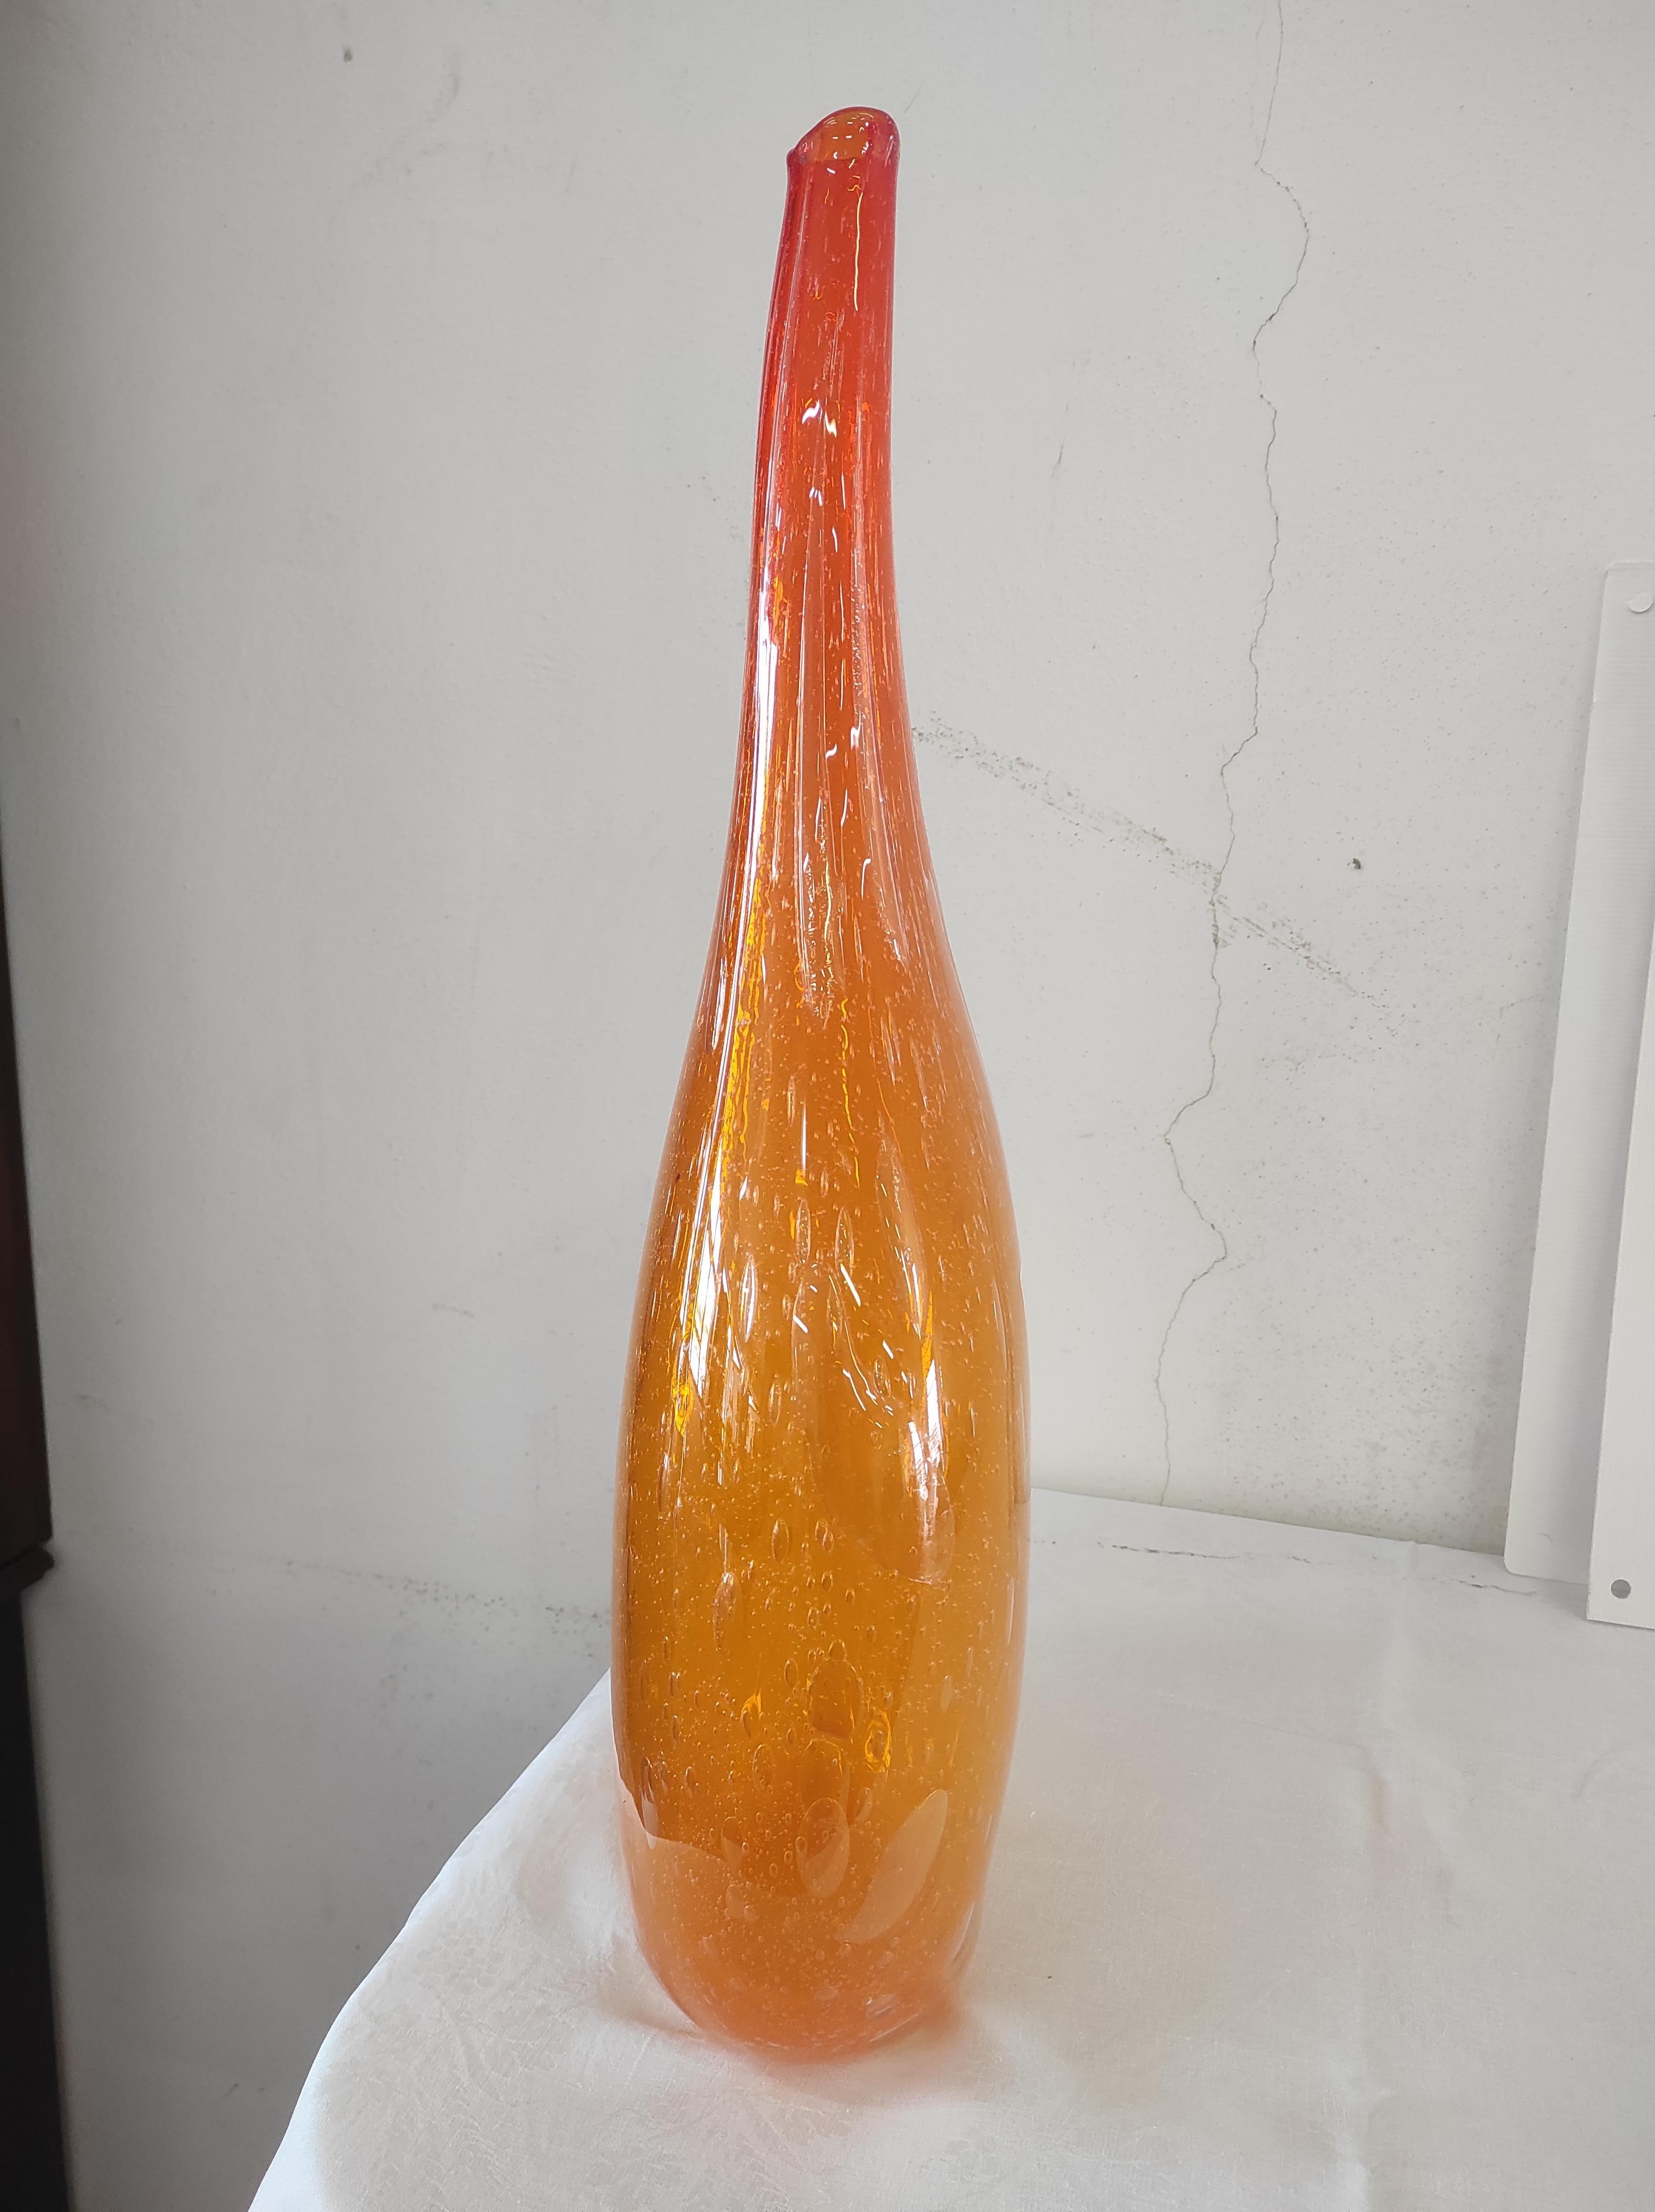 Orange-colored Murano blown glass vase.
The size of this jar means that it is very difficult to execute because the longer the top of the jar is stretched, the greater the risk of breakage.
It was created by master glassmaker Sergio Costantini using